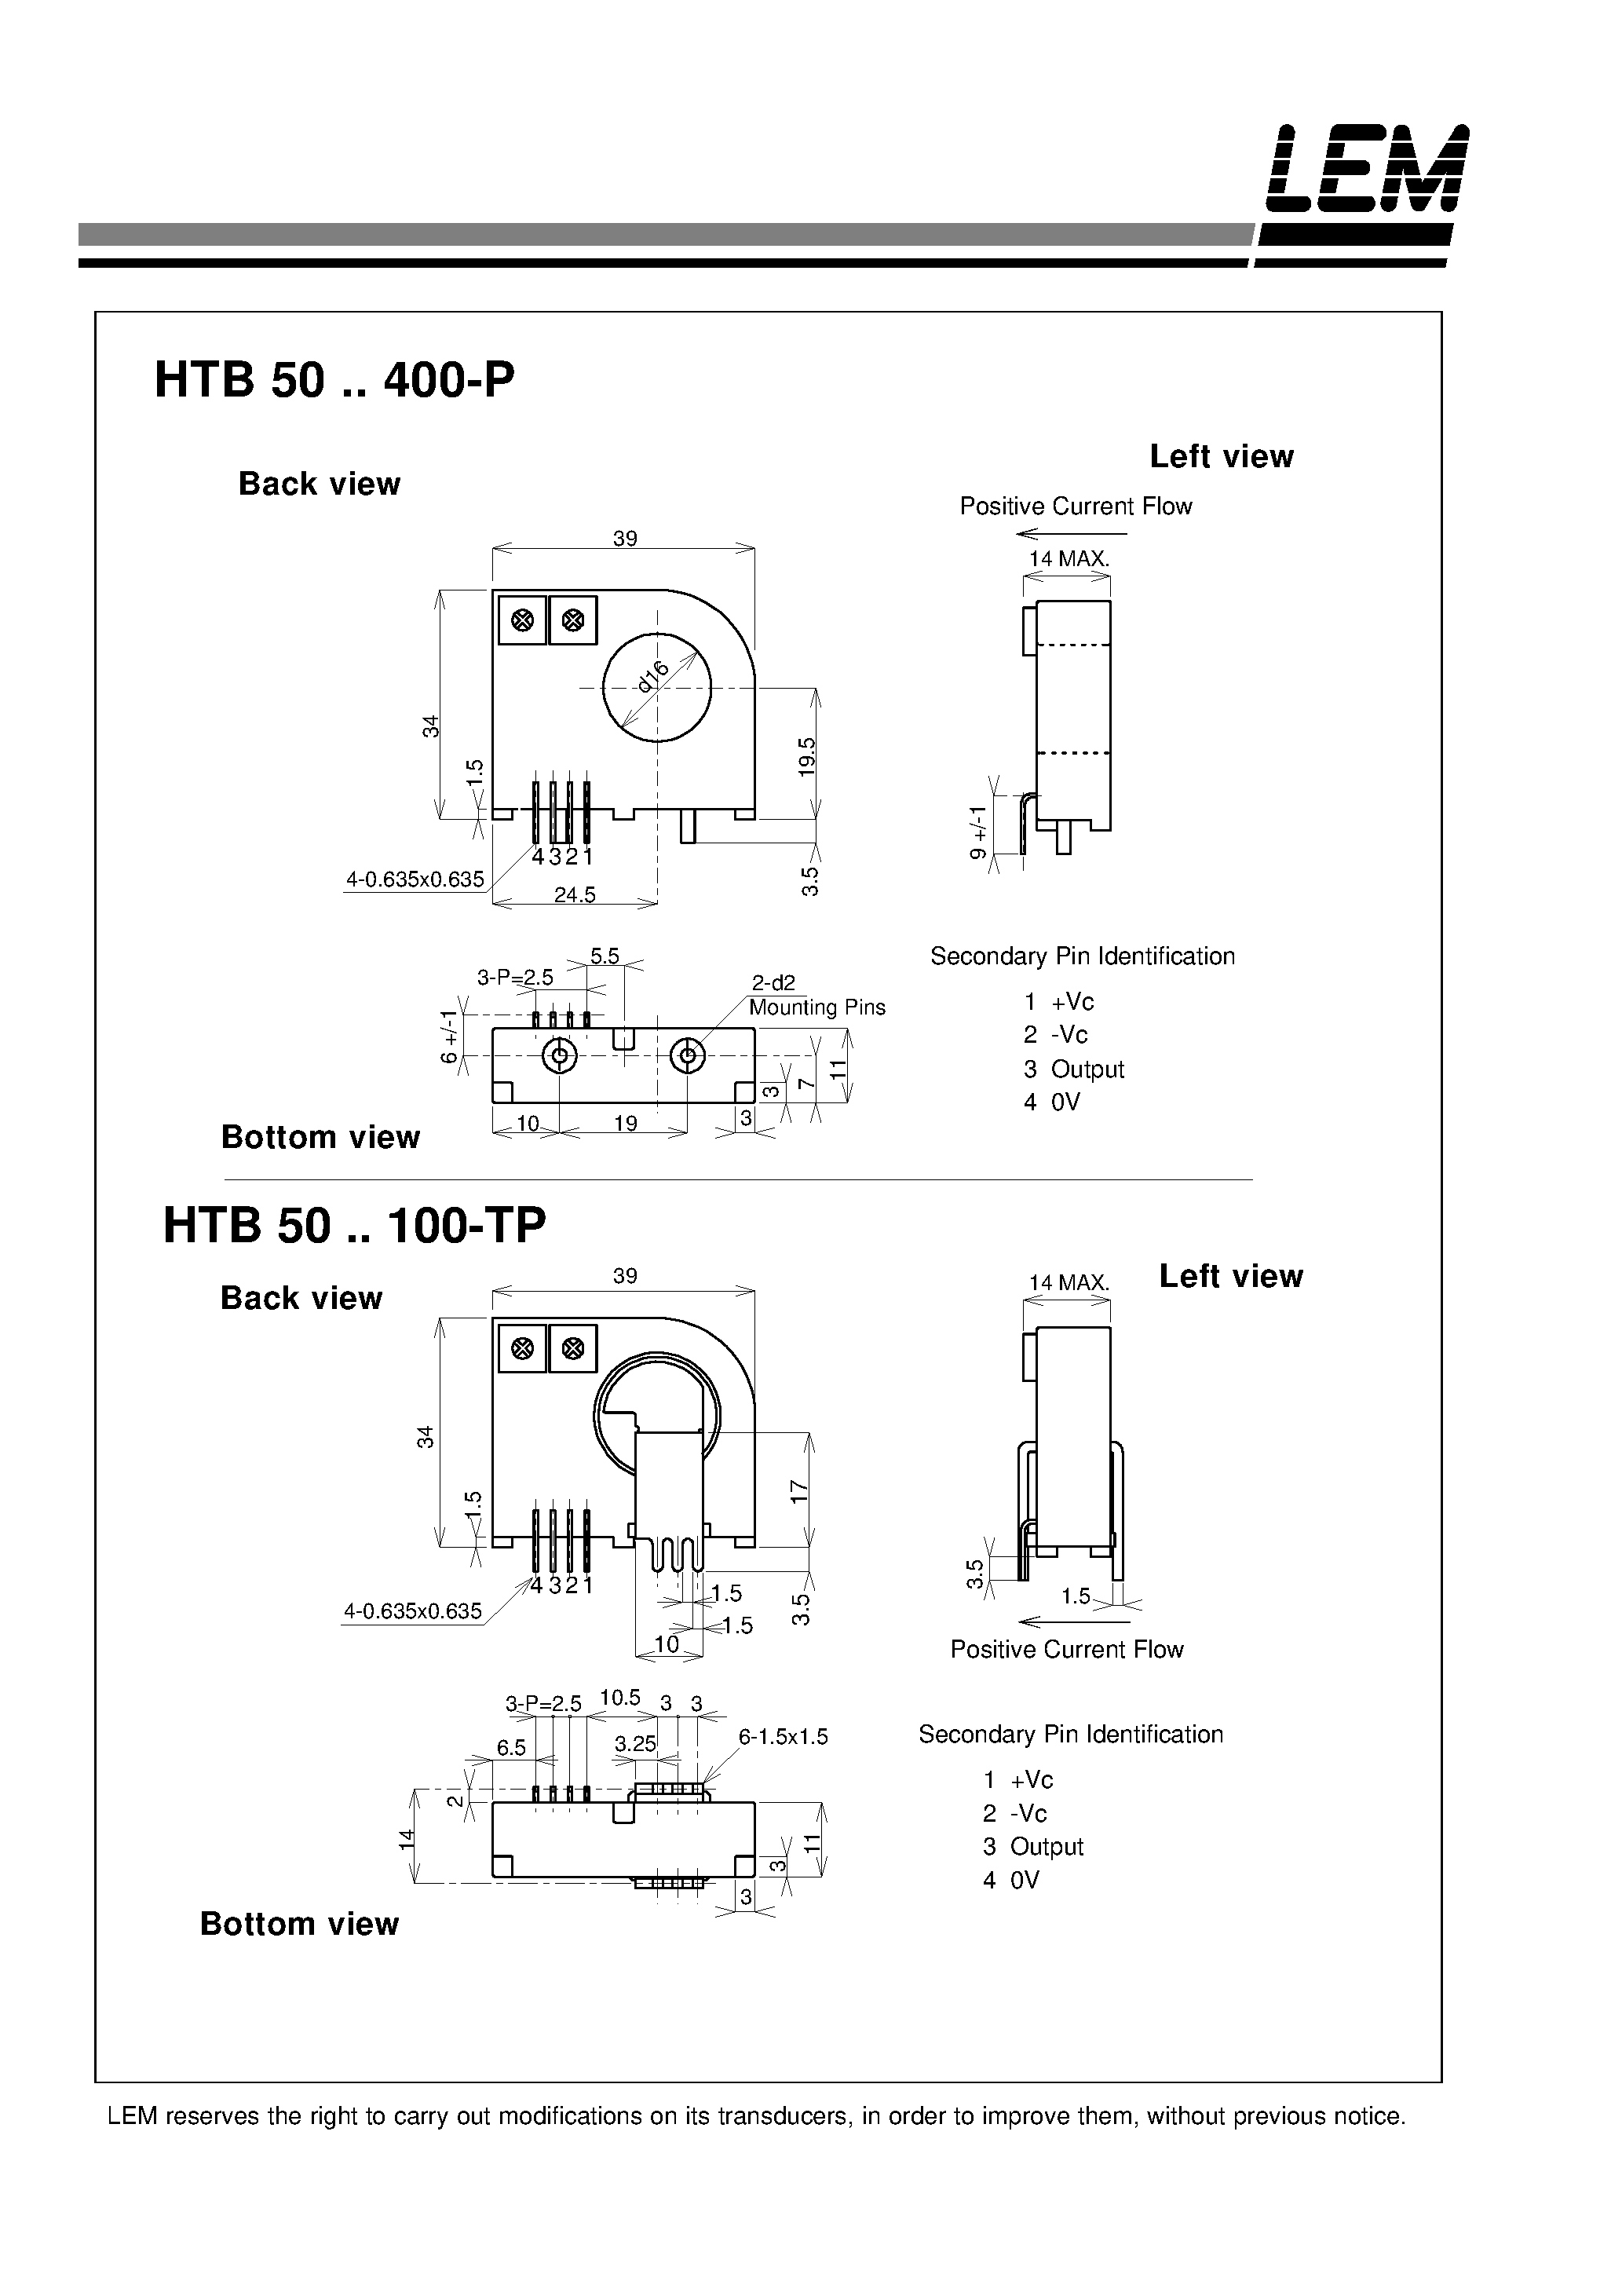 Datasheet HTB300-P - Current Transducers HTB 50~400-P and HTB 50~100-TP page 2